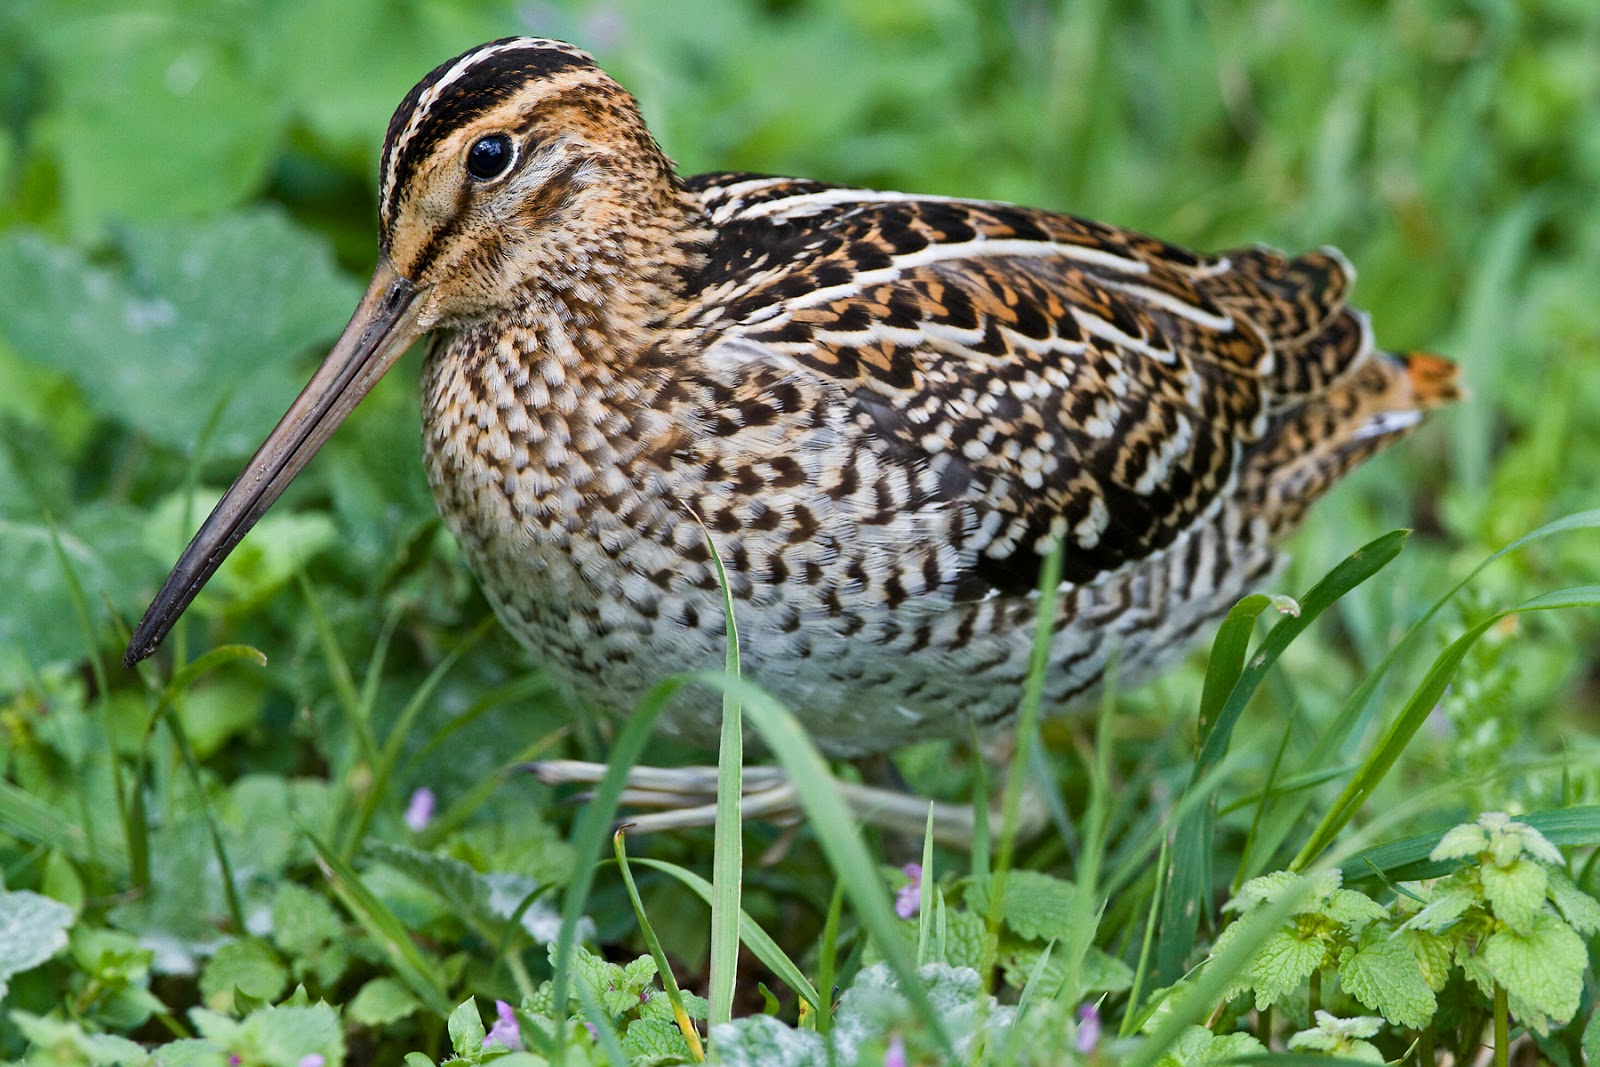 Snipe in the grass in search of hatchbacks